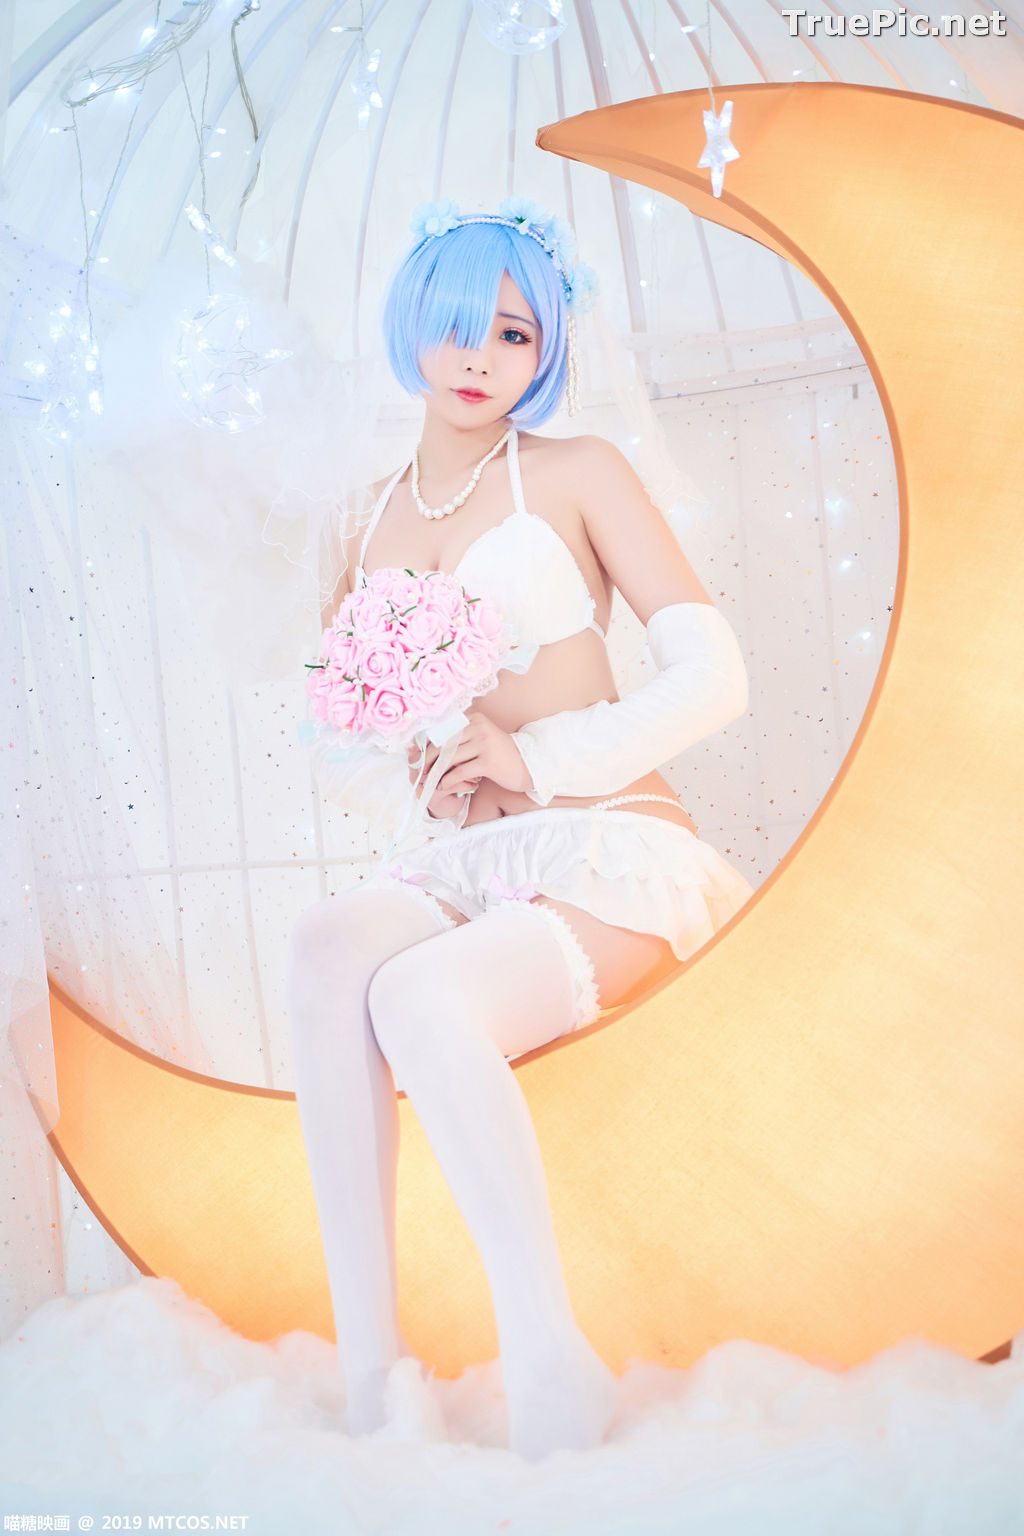 Image [MTCos] 喵糖映画 Vol.043 – Chinese Cute Model – Sexy Rem Cosplay - TruePic.net - Picture-15